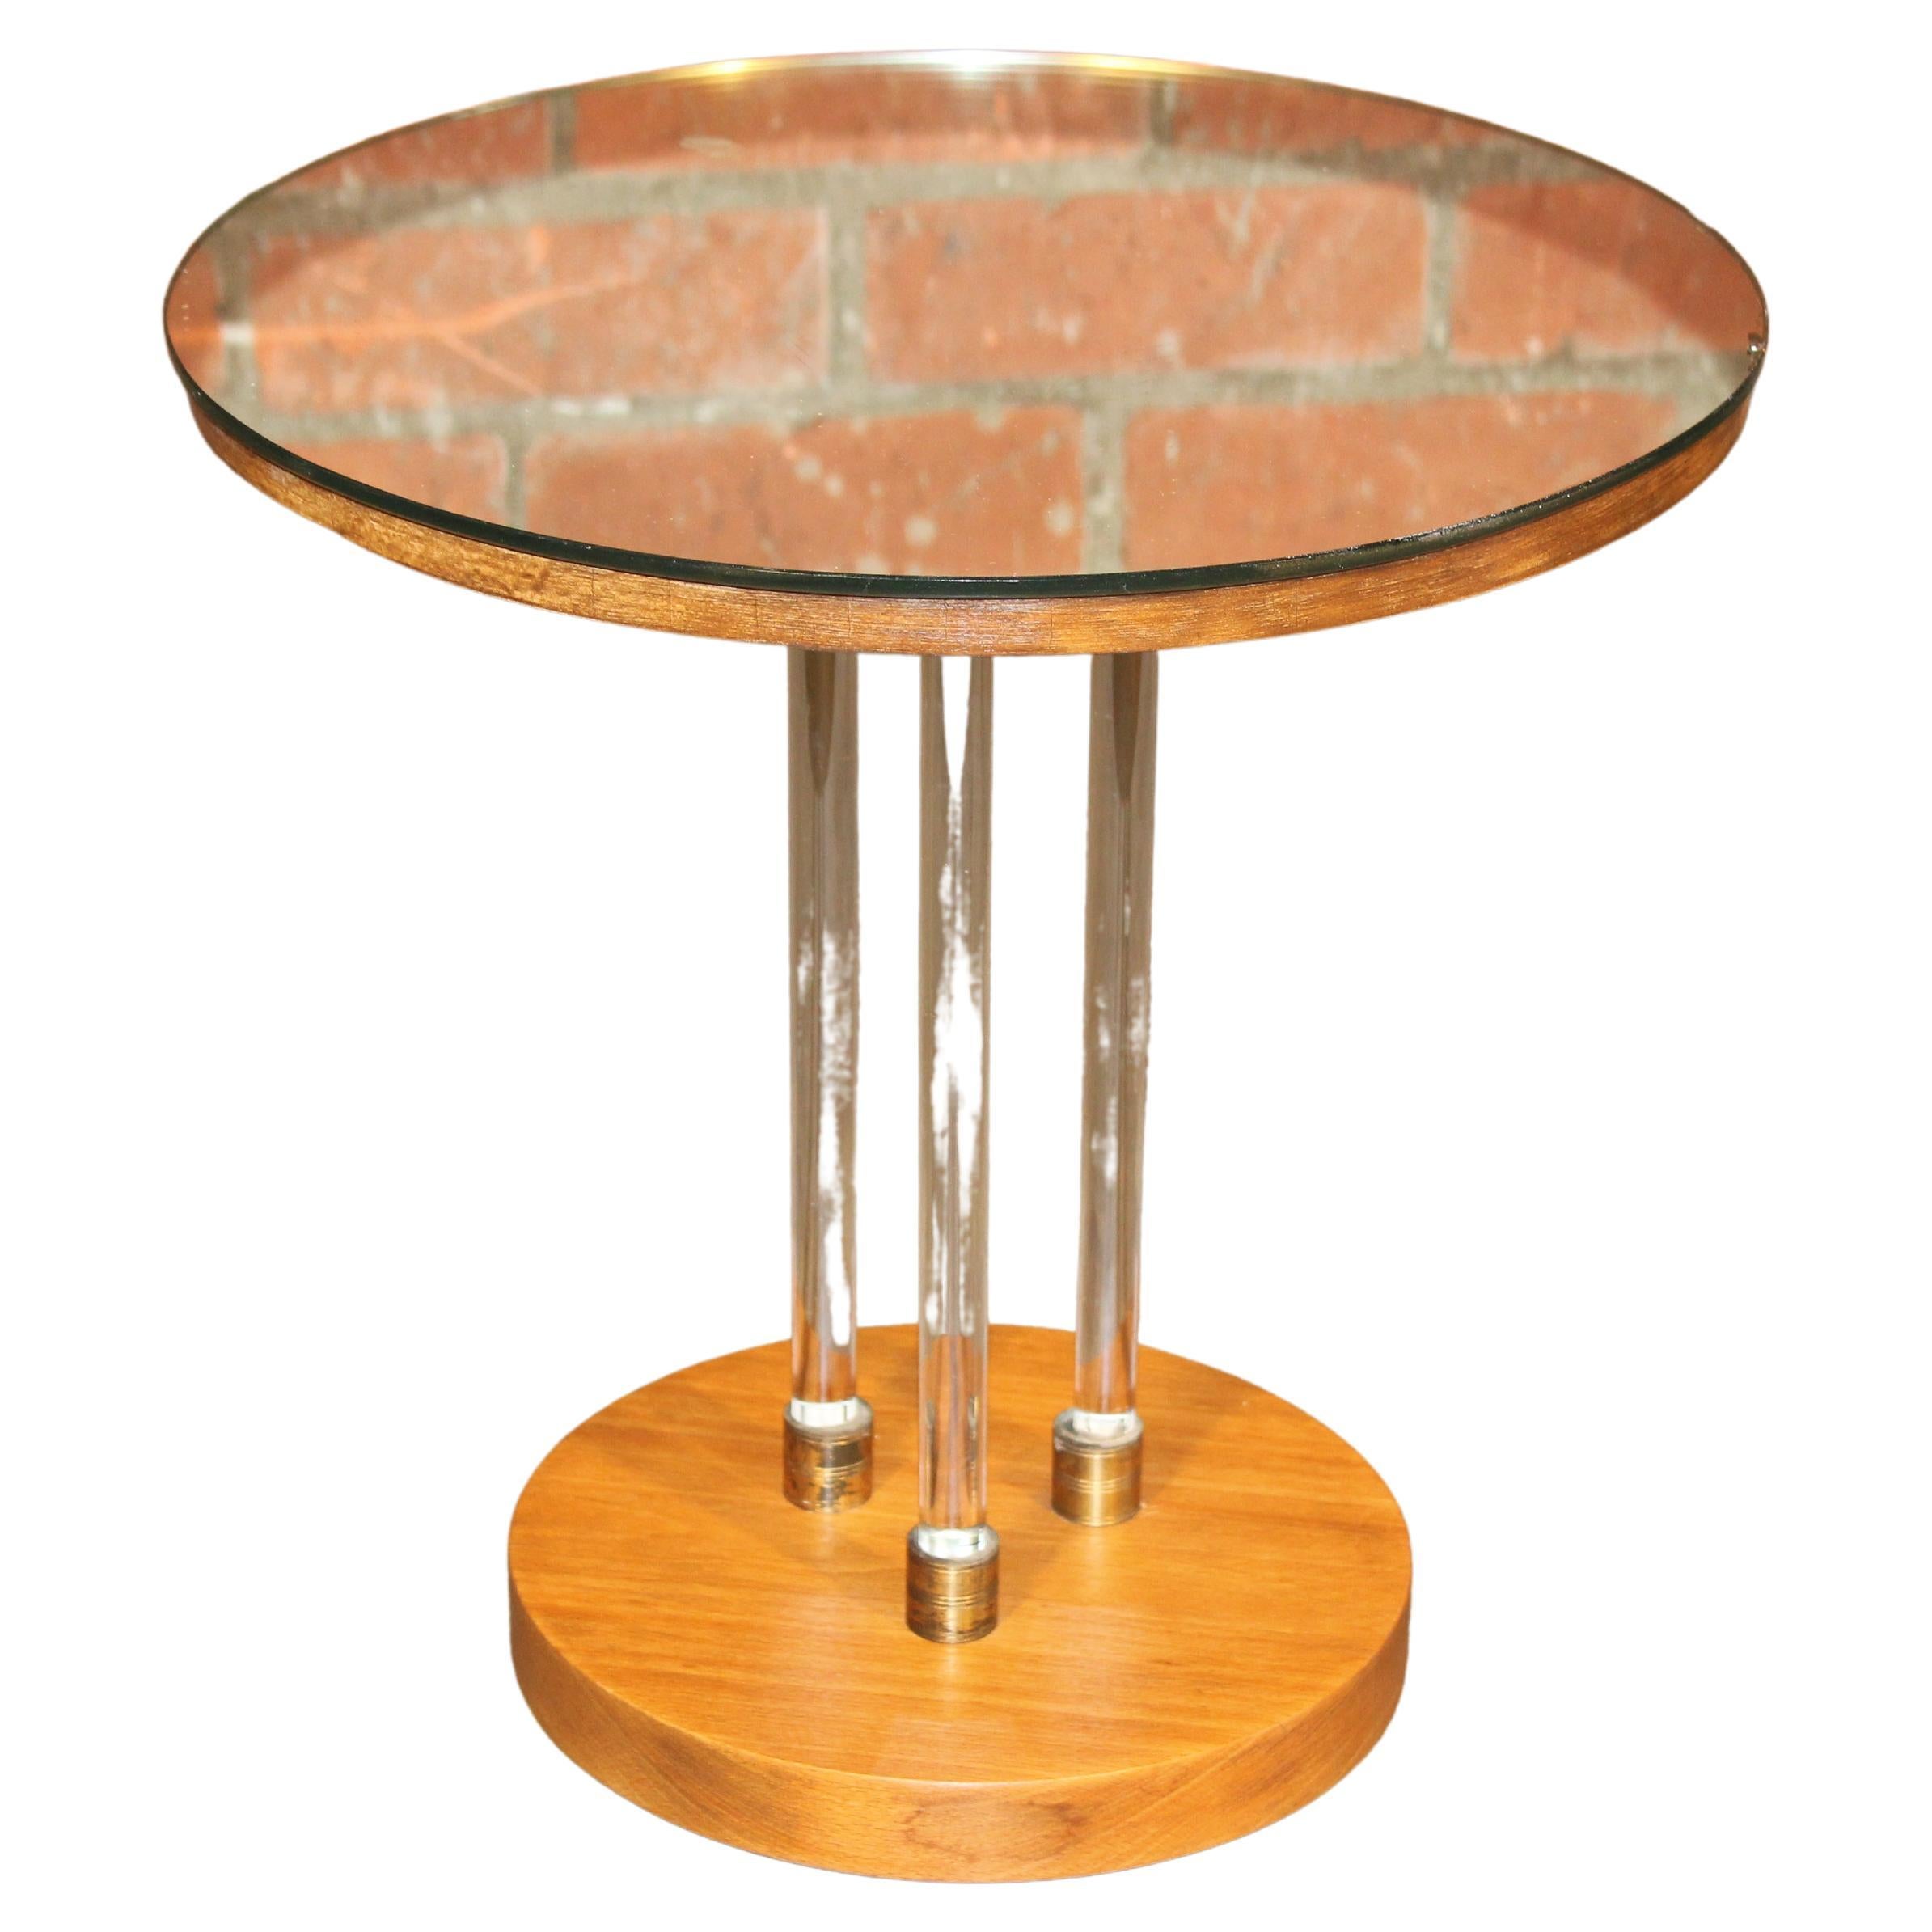 Glass and Mirror Side Table with Brass Accents, France, 1940s